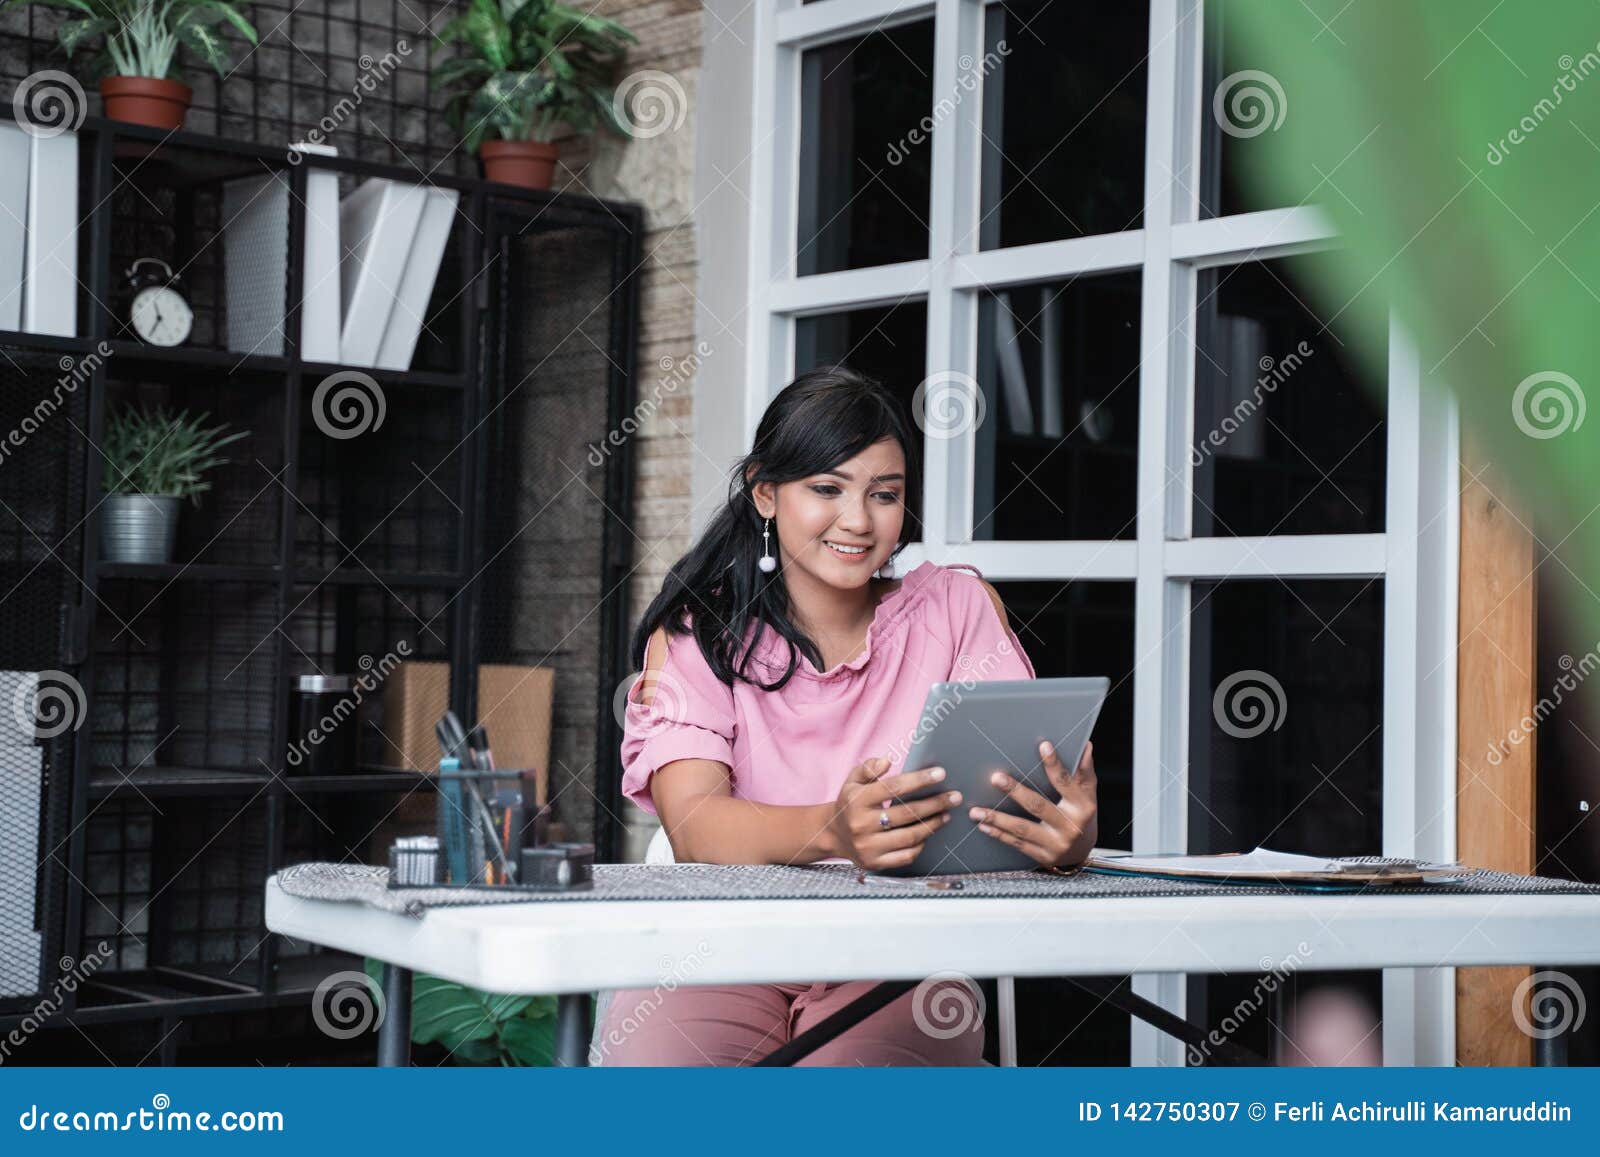 Young Entrepreneur with Her Startup Company Stock Image - Image of ...